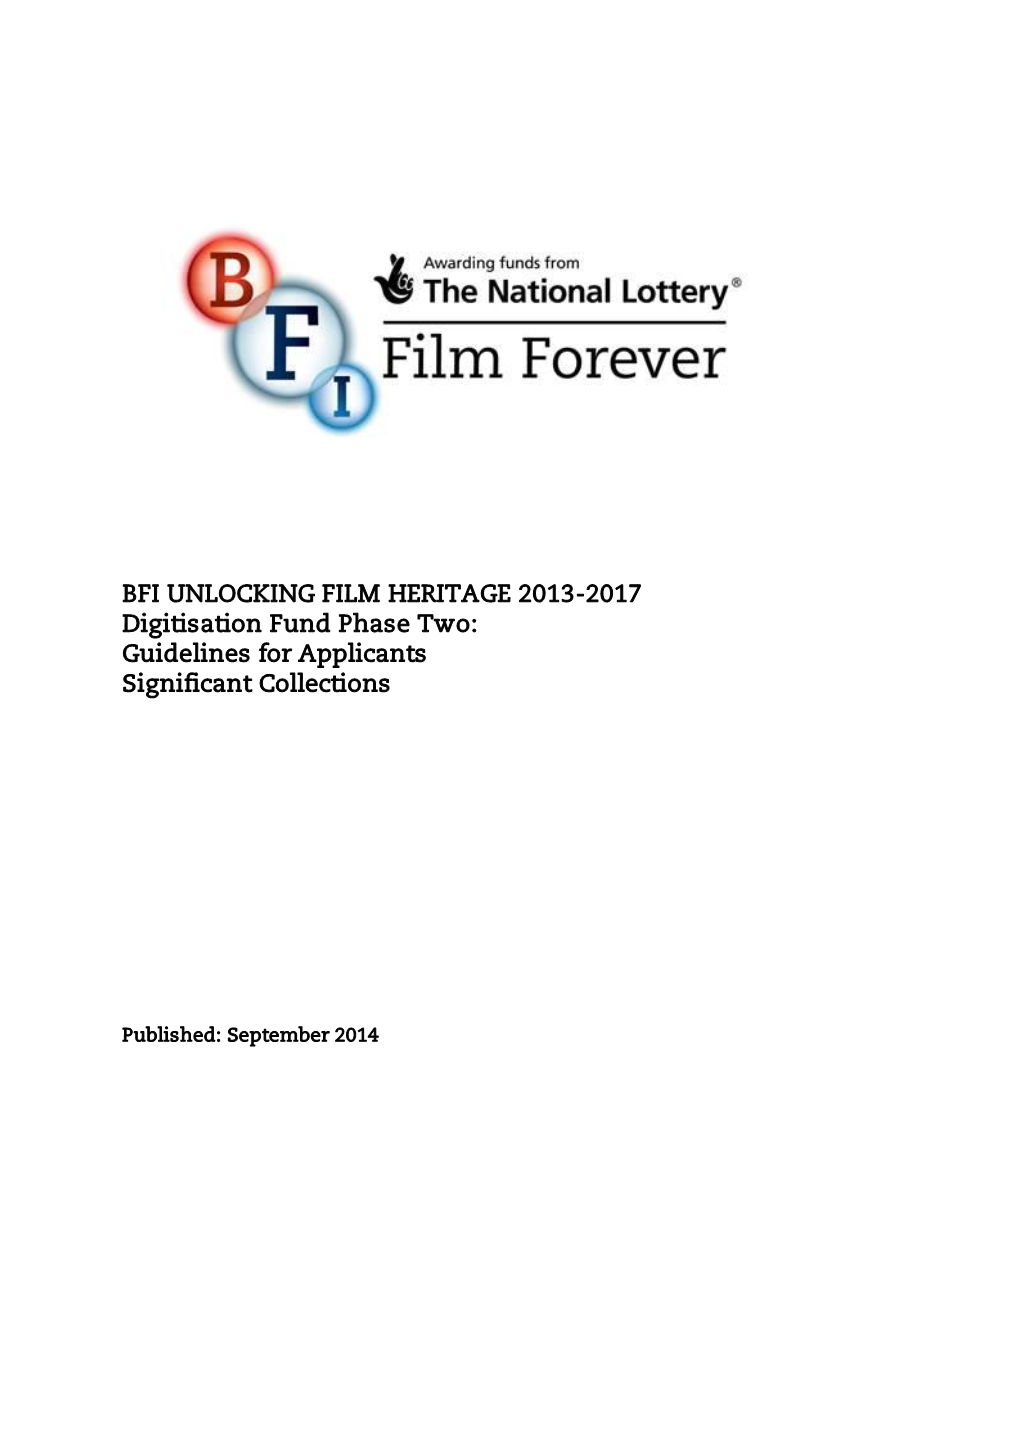 BFI UNLOCKING FILM HERITAGE 2013-2017 Digitisation Fund Phase Two: Guidelines for Applicants Significant Collections